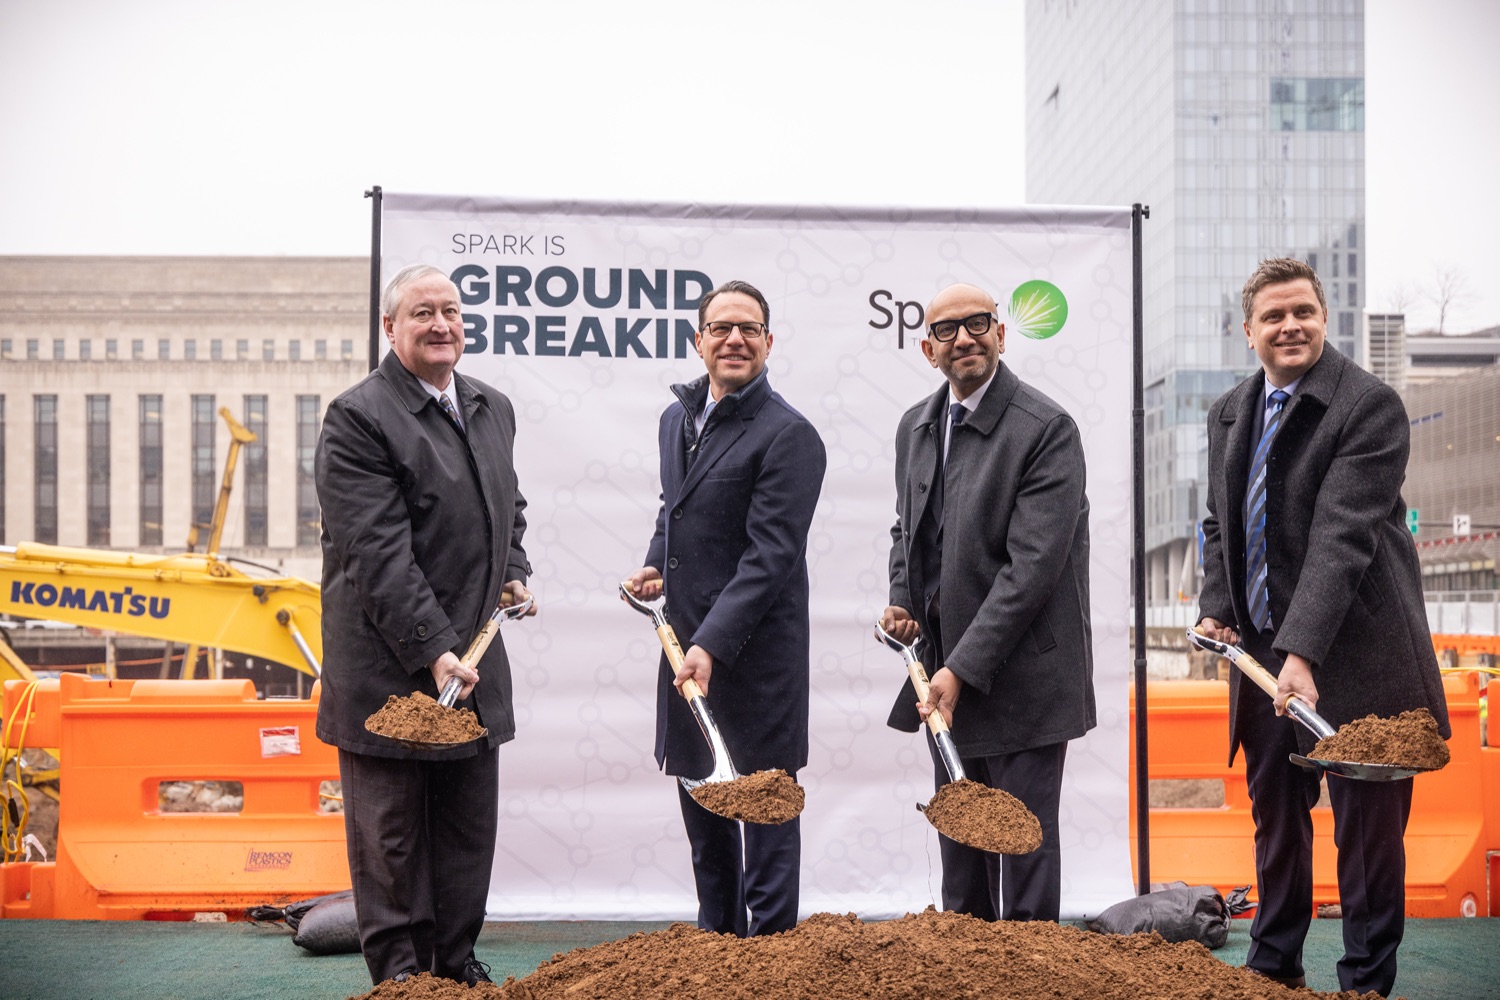 Pennsylvania Governor Josh Shapiro participates in a groundbreaking for Spark Therapeutics at the future site of their new building, at 30th and Chestnut streets.  FEBRUARY 28, 2023 - PHILADELPHIA, PA<br><a href="https://filesource.amperwave.net/commonwealthofpa/photo/22728_gov_spark_dz_0016.JPG" target="_blank">⇣ Download Photo</a>